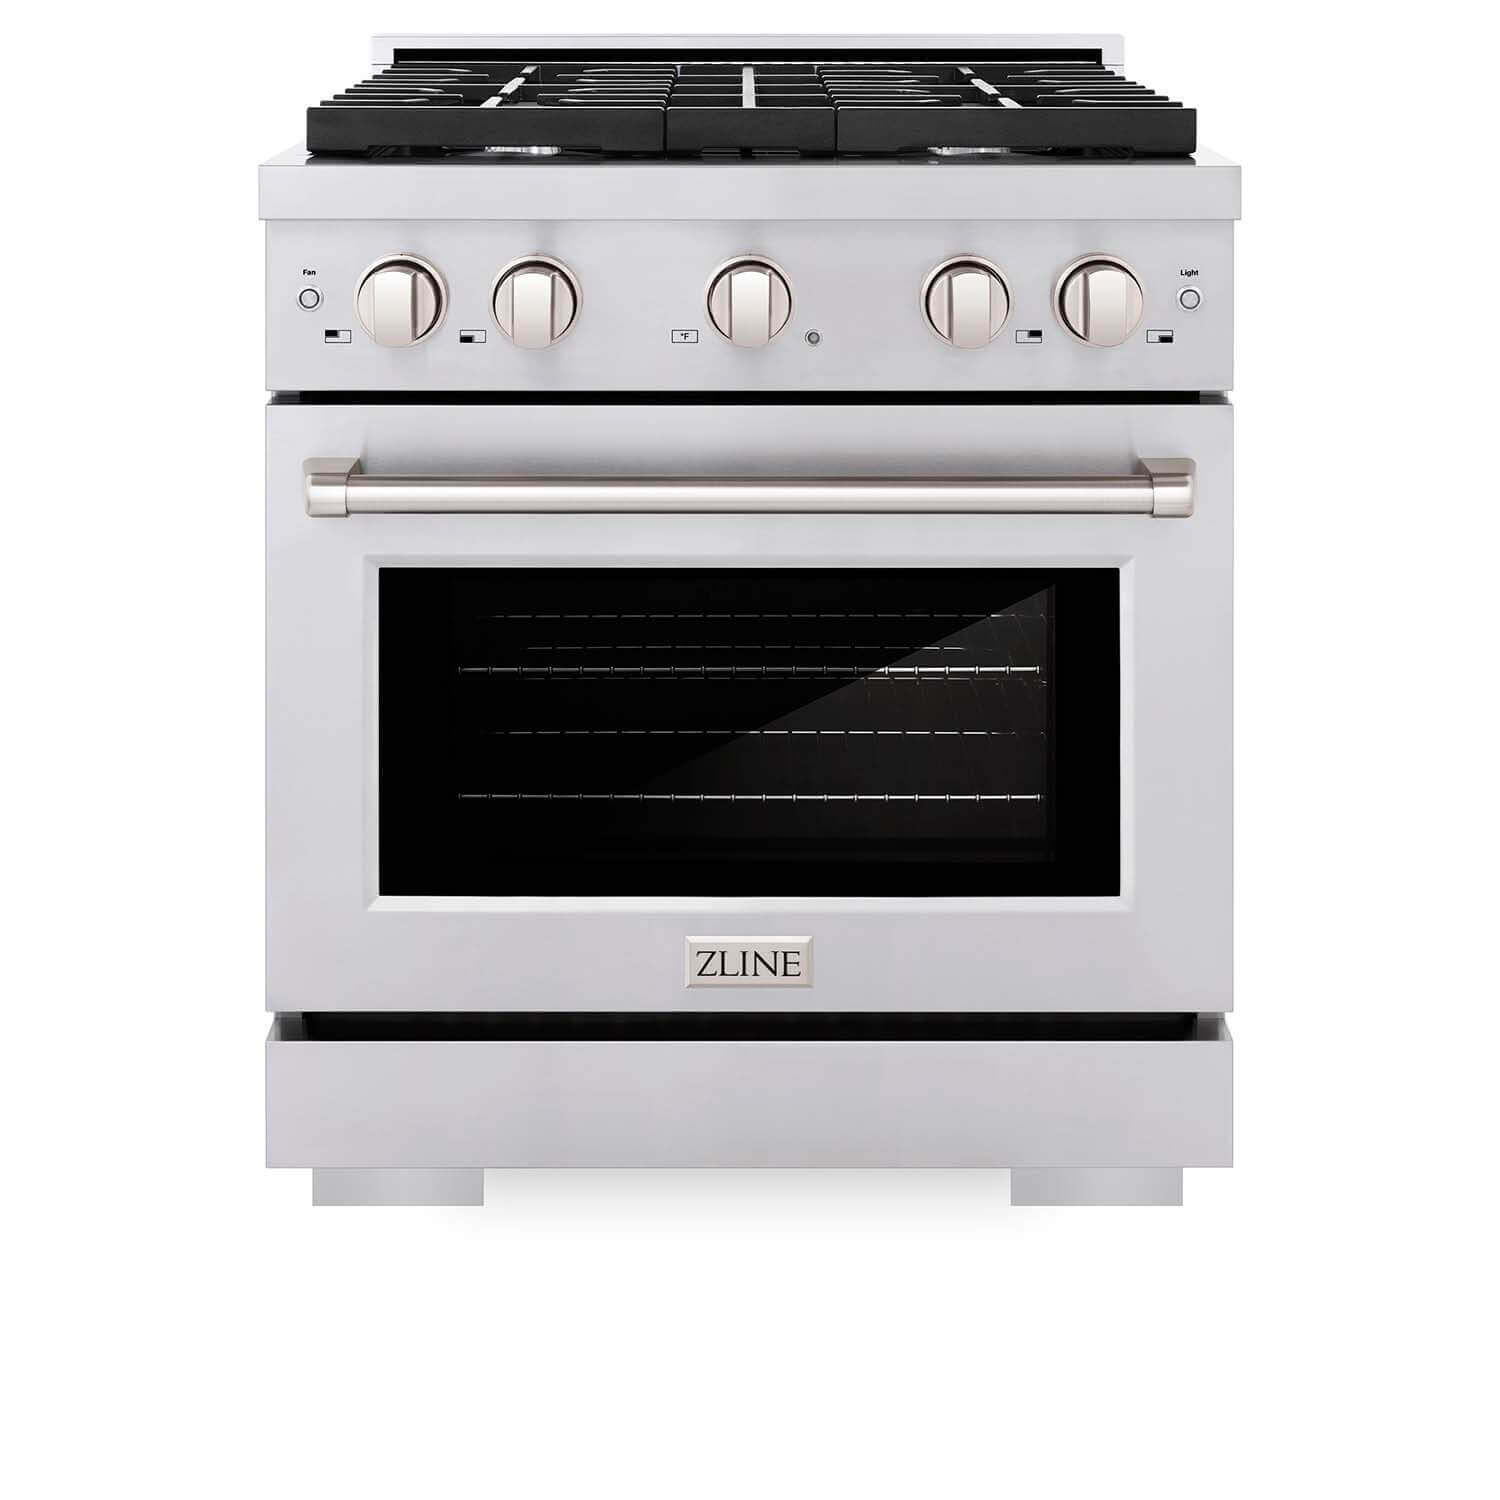 ZLINE 30 in. 4.2 cu. ft. 4 Burner Gas Range with Convection Gas Oven in Stainless Steel (SGR30) front, oven closed.